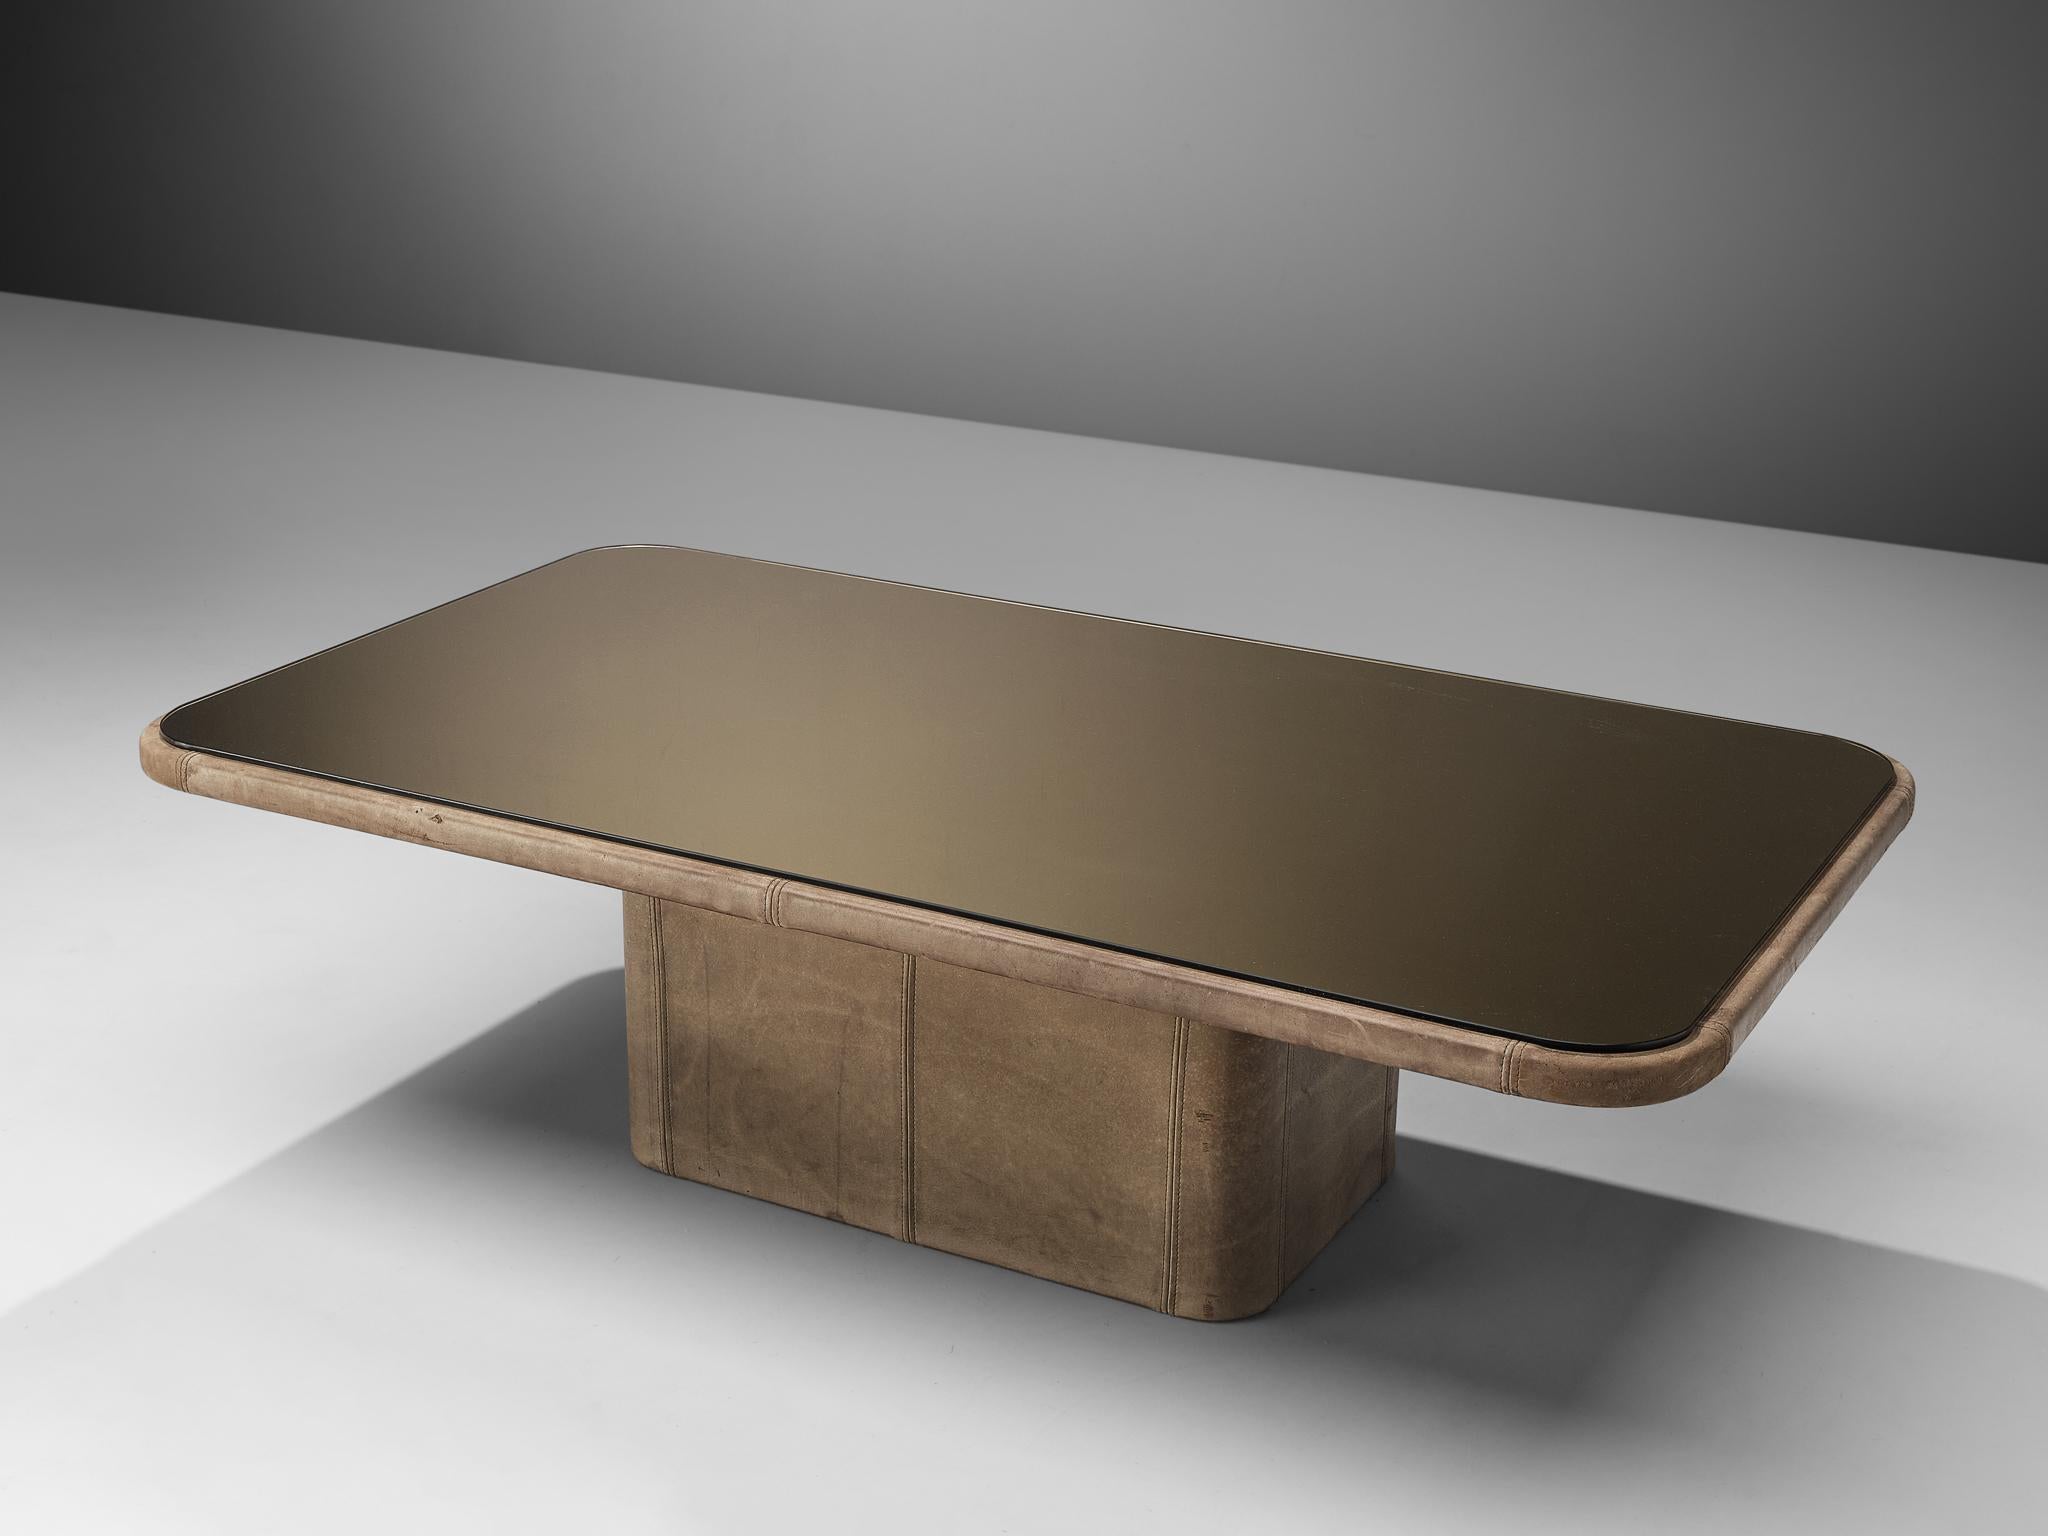 Attributed to De Sede, coffee table, leather, smoked glass, Switzerland, 1970s.

This robust and rectangular cocktail table is designed in the style of De Sede in the 1970s. The table is completely covered in grey leather and a smoked glass top.